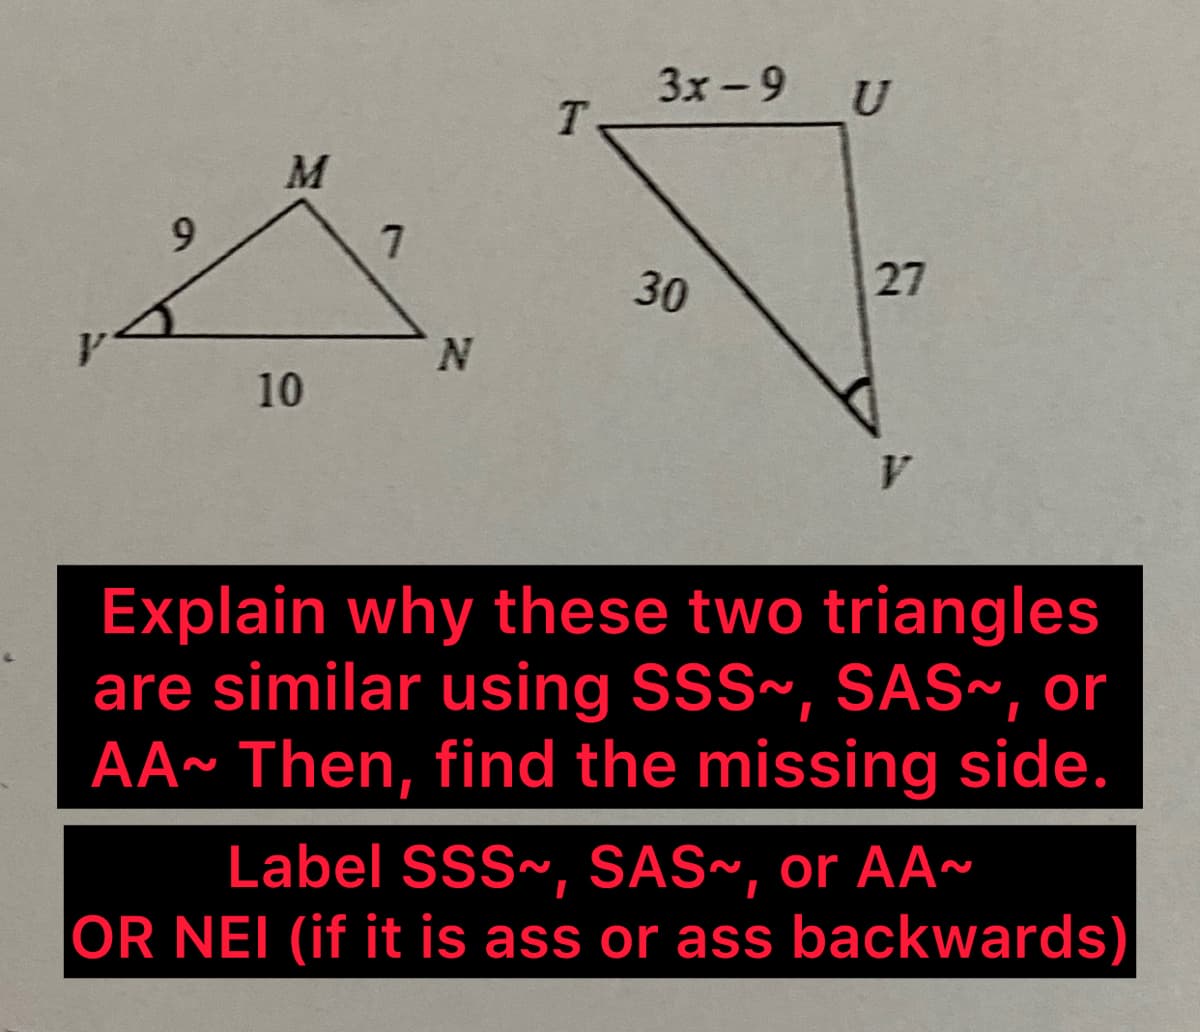 9
M
10
7
N
T
3x-9
30
U
27
Explain why these two triangles
are similar using SSS~, SAS~, or
AA~ Then, find the missing side.
Label SSS~, SAS~, or AA~
OR NEI (if it is ass or ass backwards)